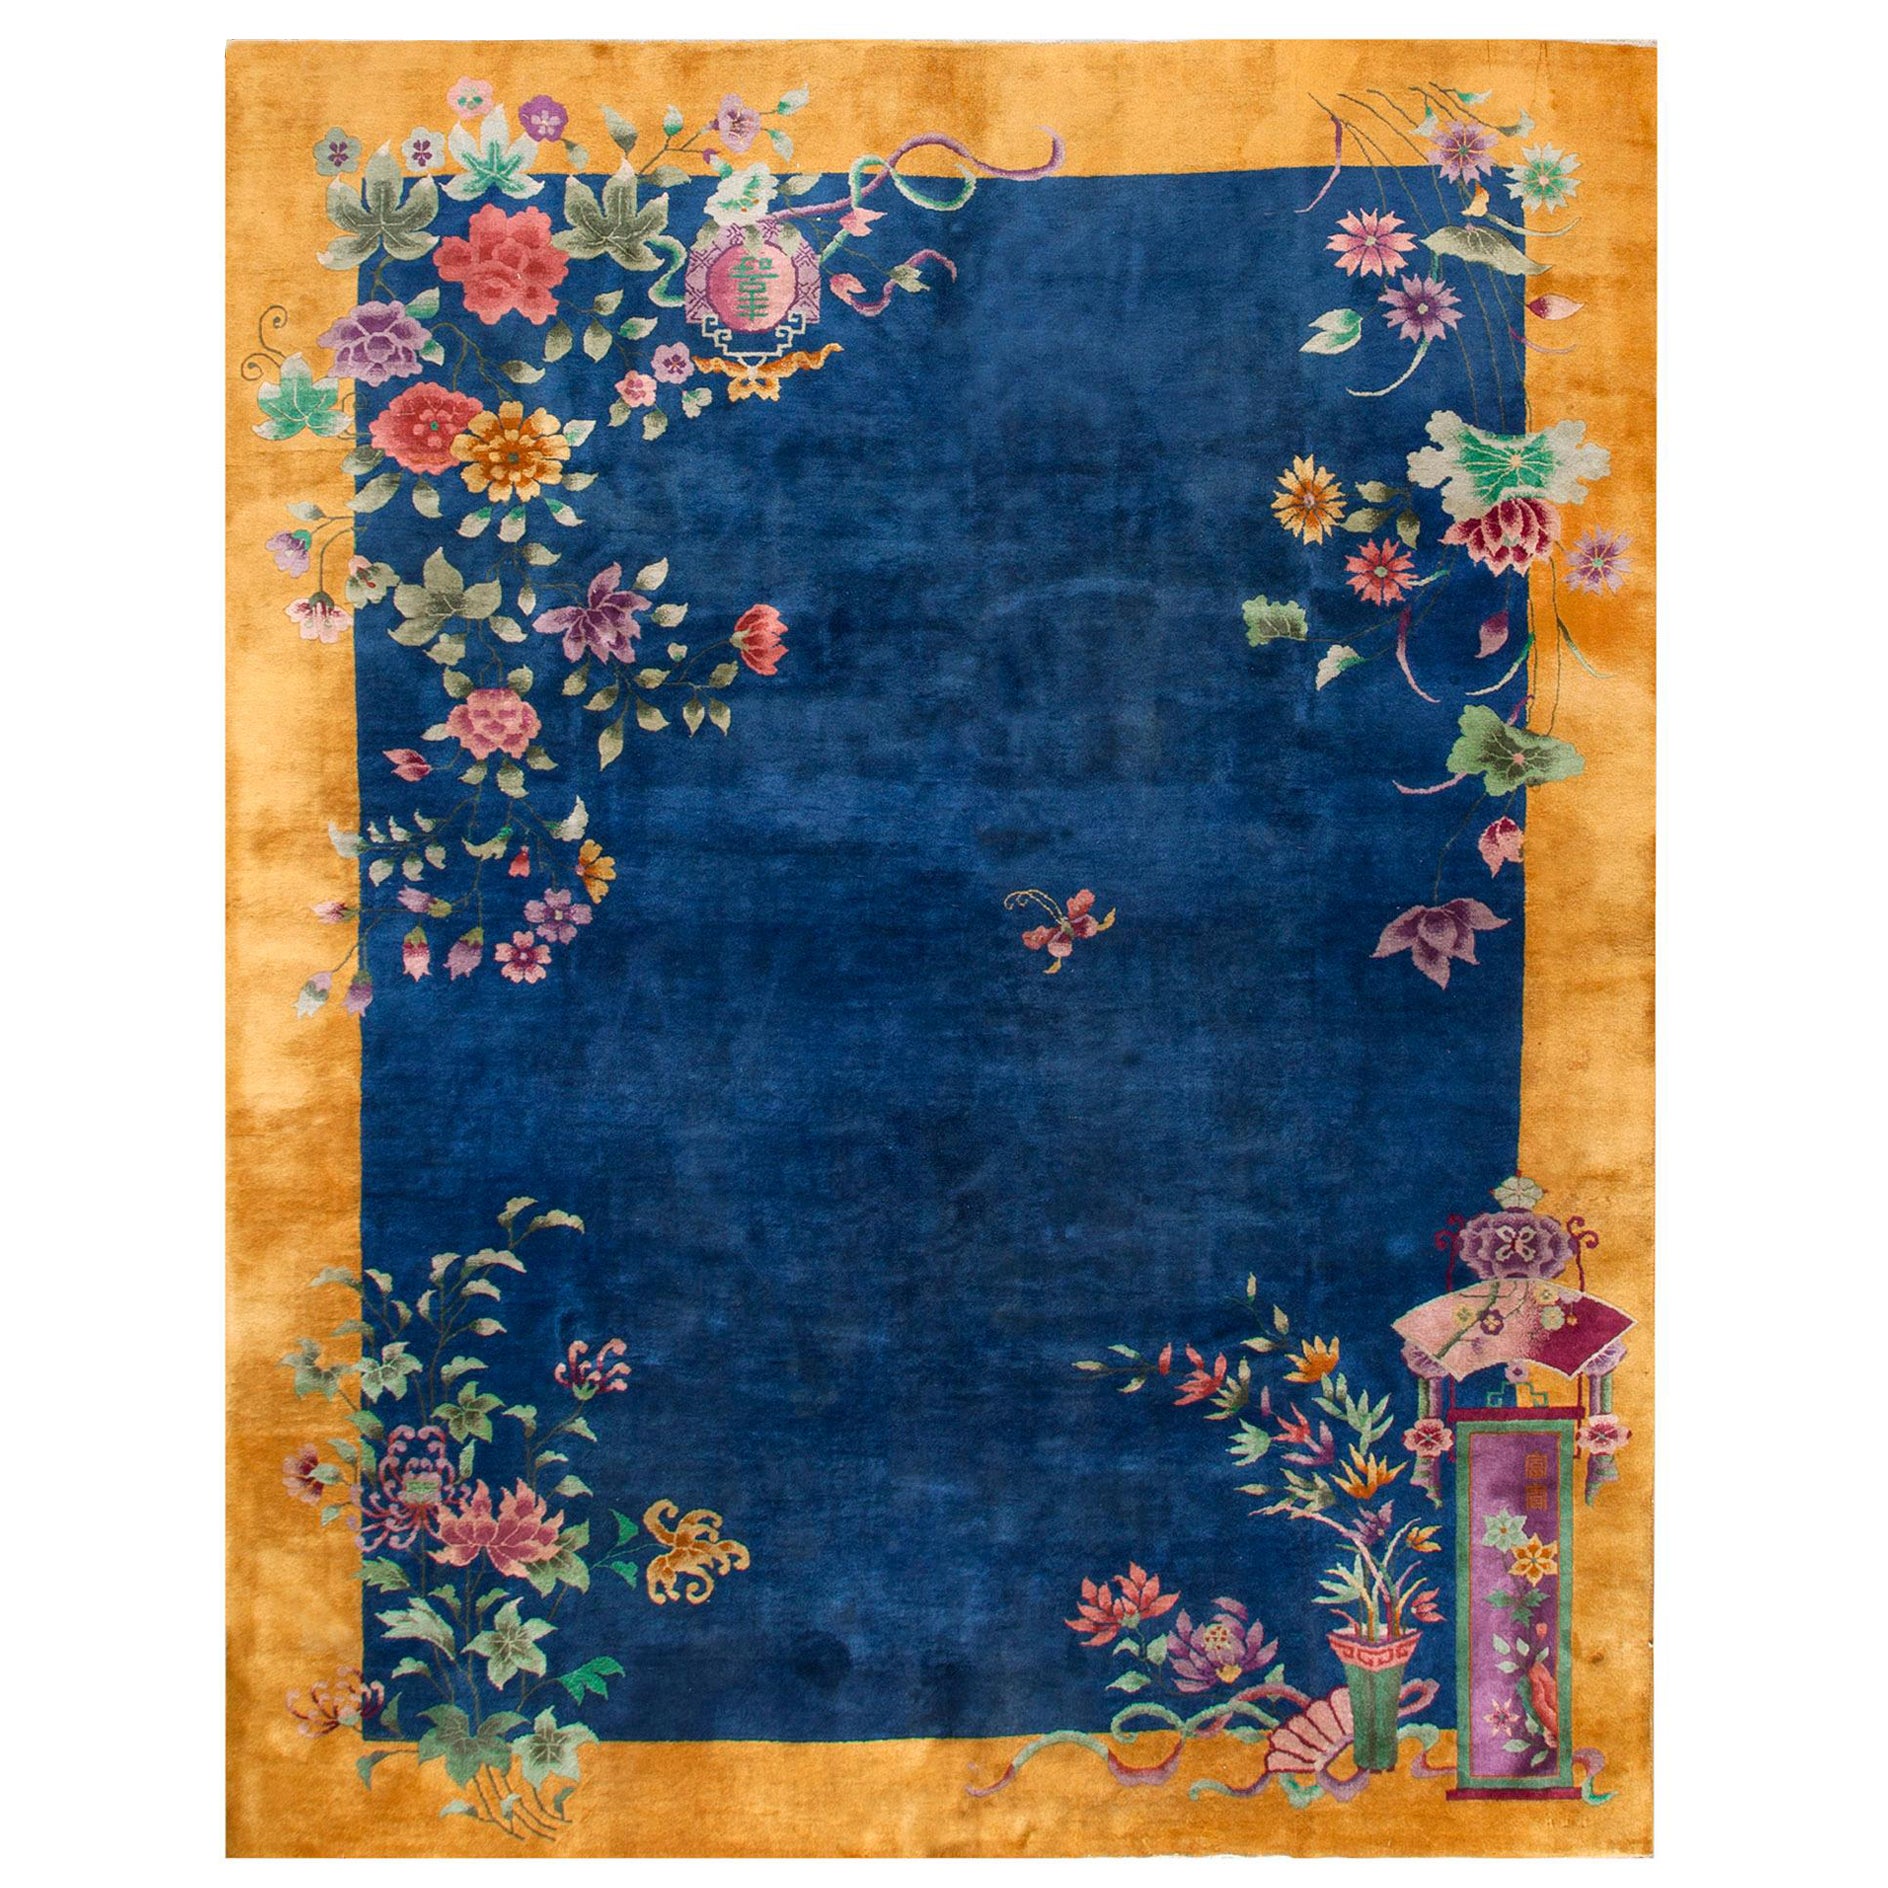 1920s Chinese Art Deco Carpet ( 8'9" x 11'4" - 267 x 345 ) For Sale